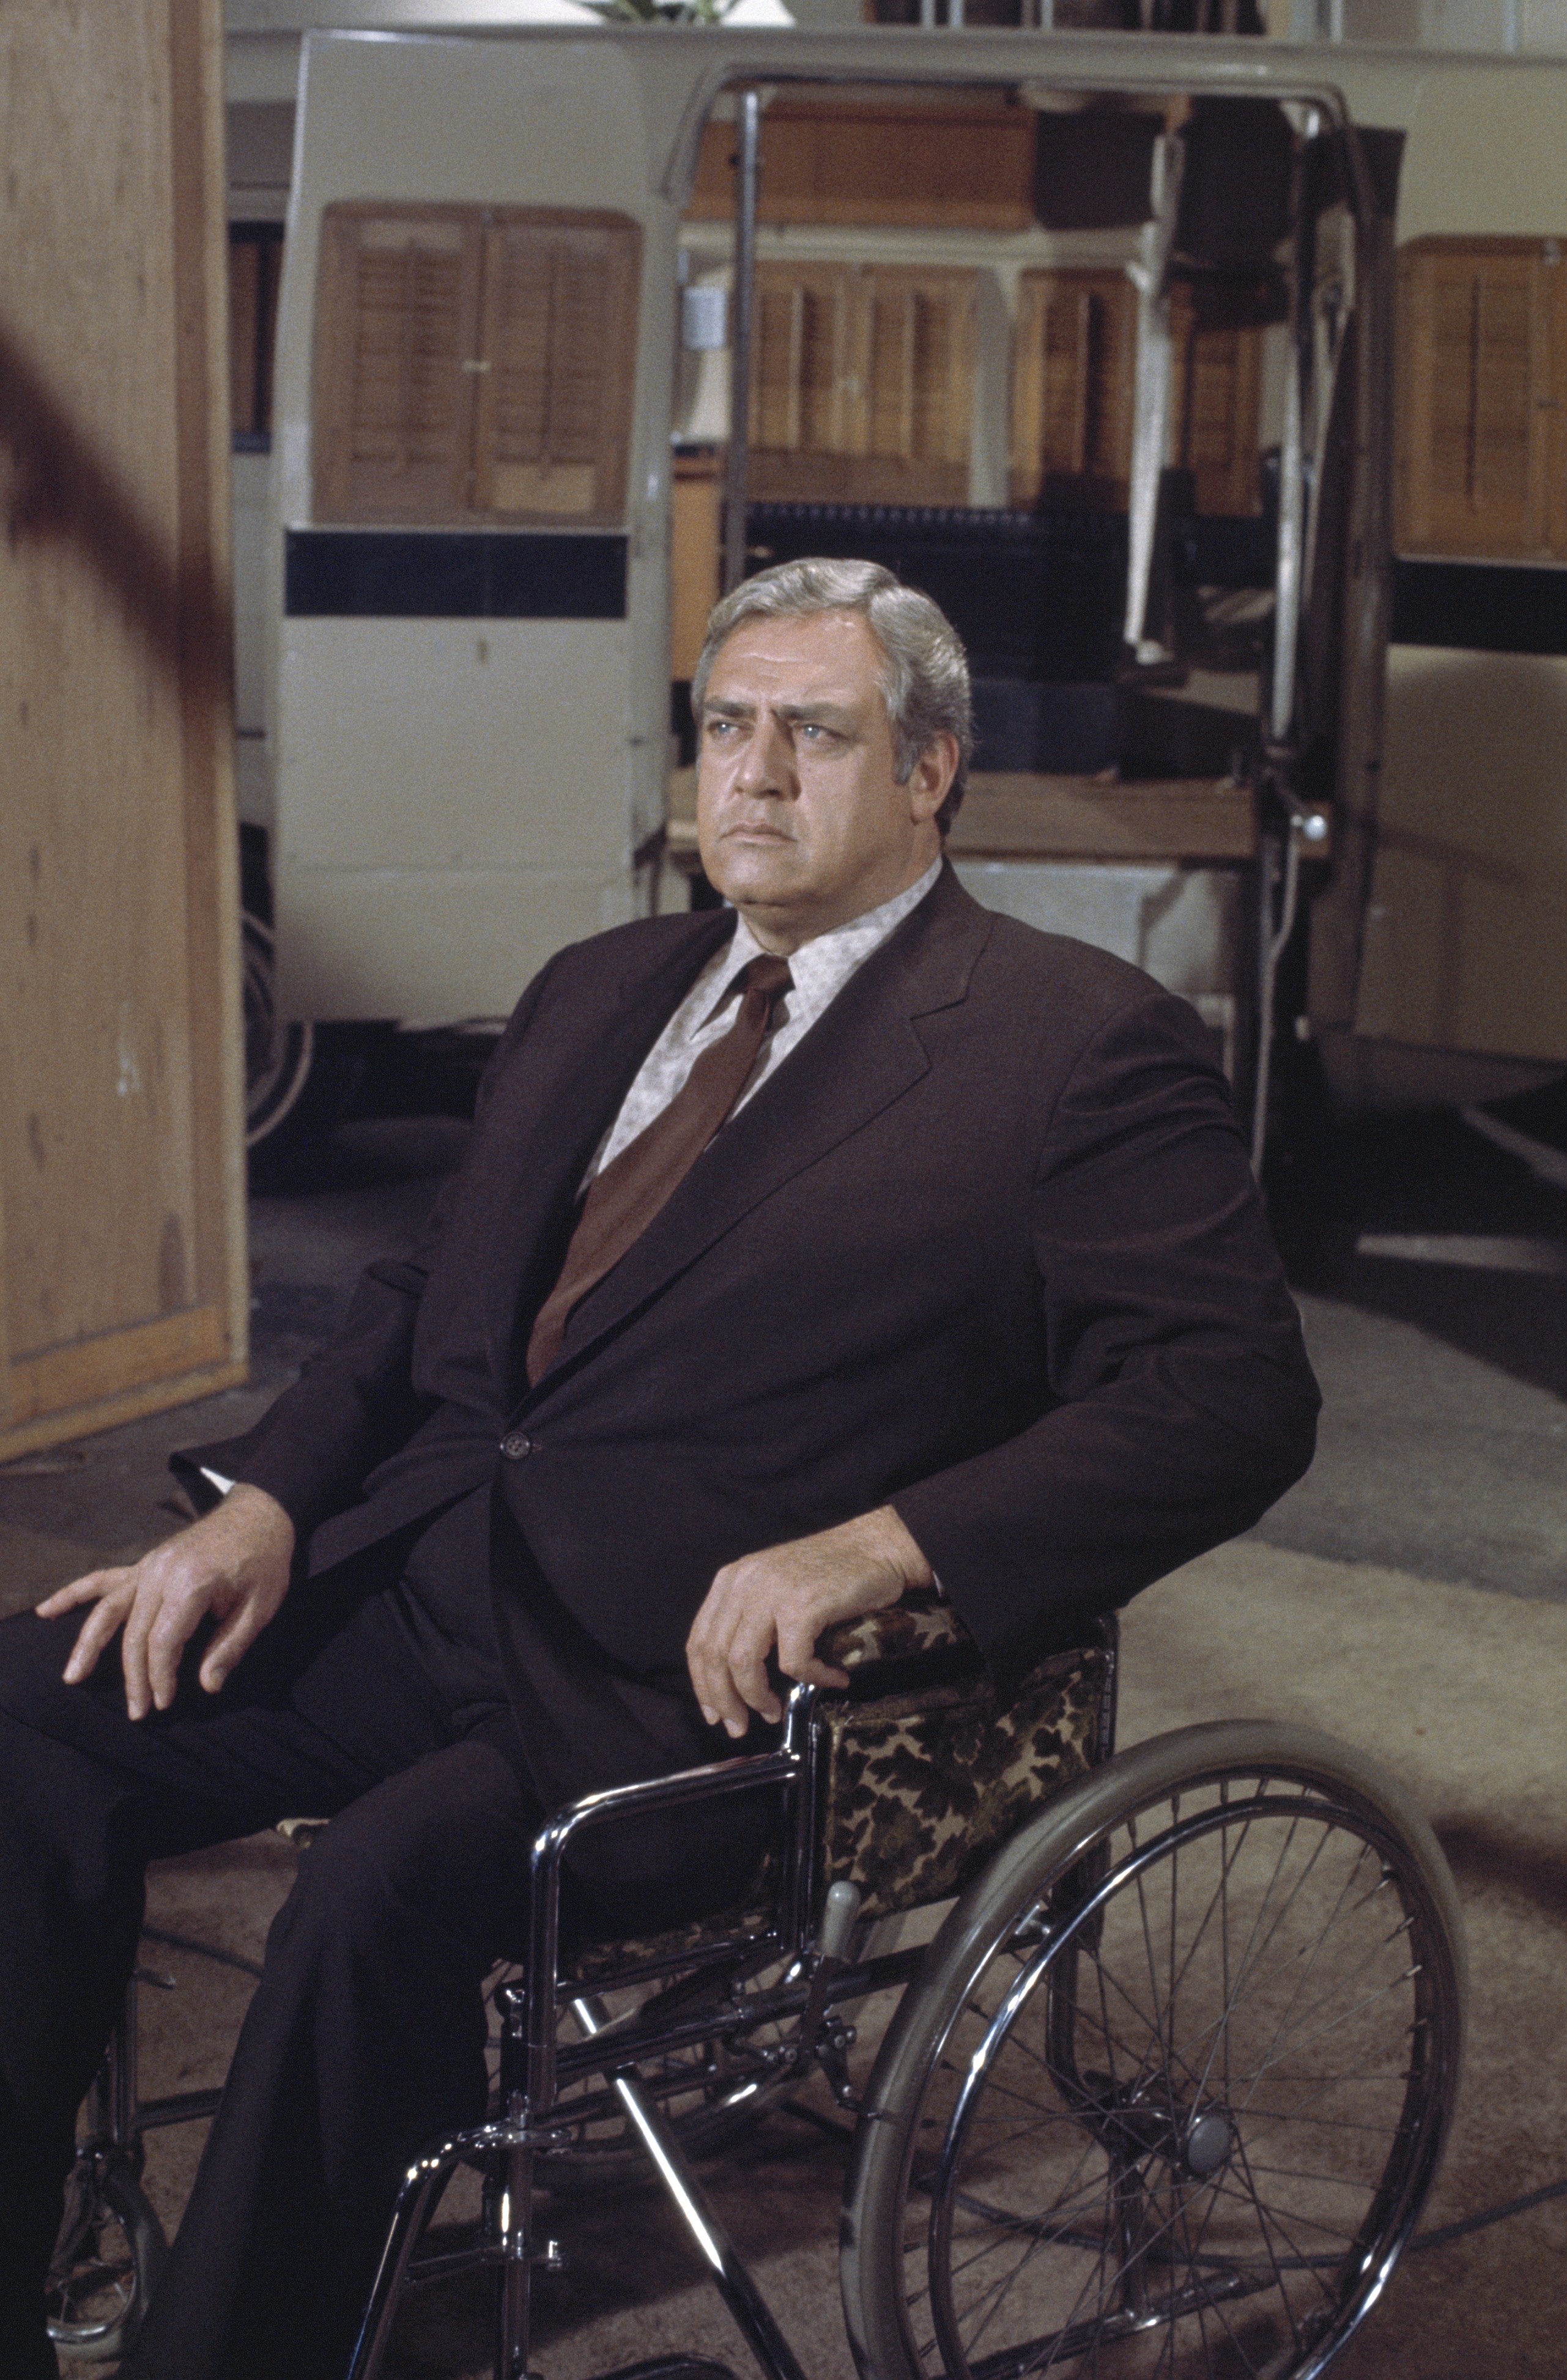 Raymond Burr pictured in a wheelchair as Robert T. Ironside on the television show, "Ironside." Getty Images